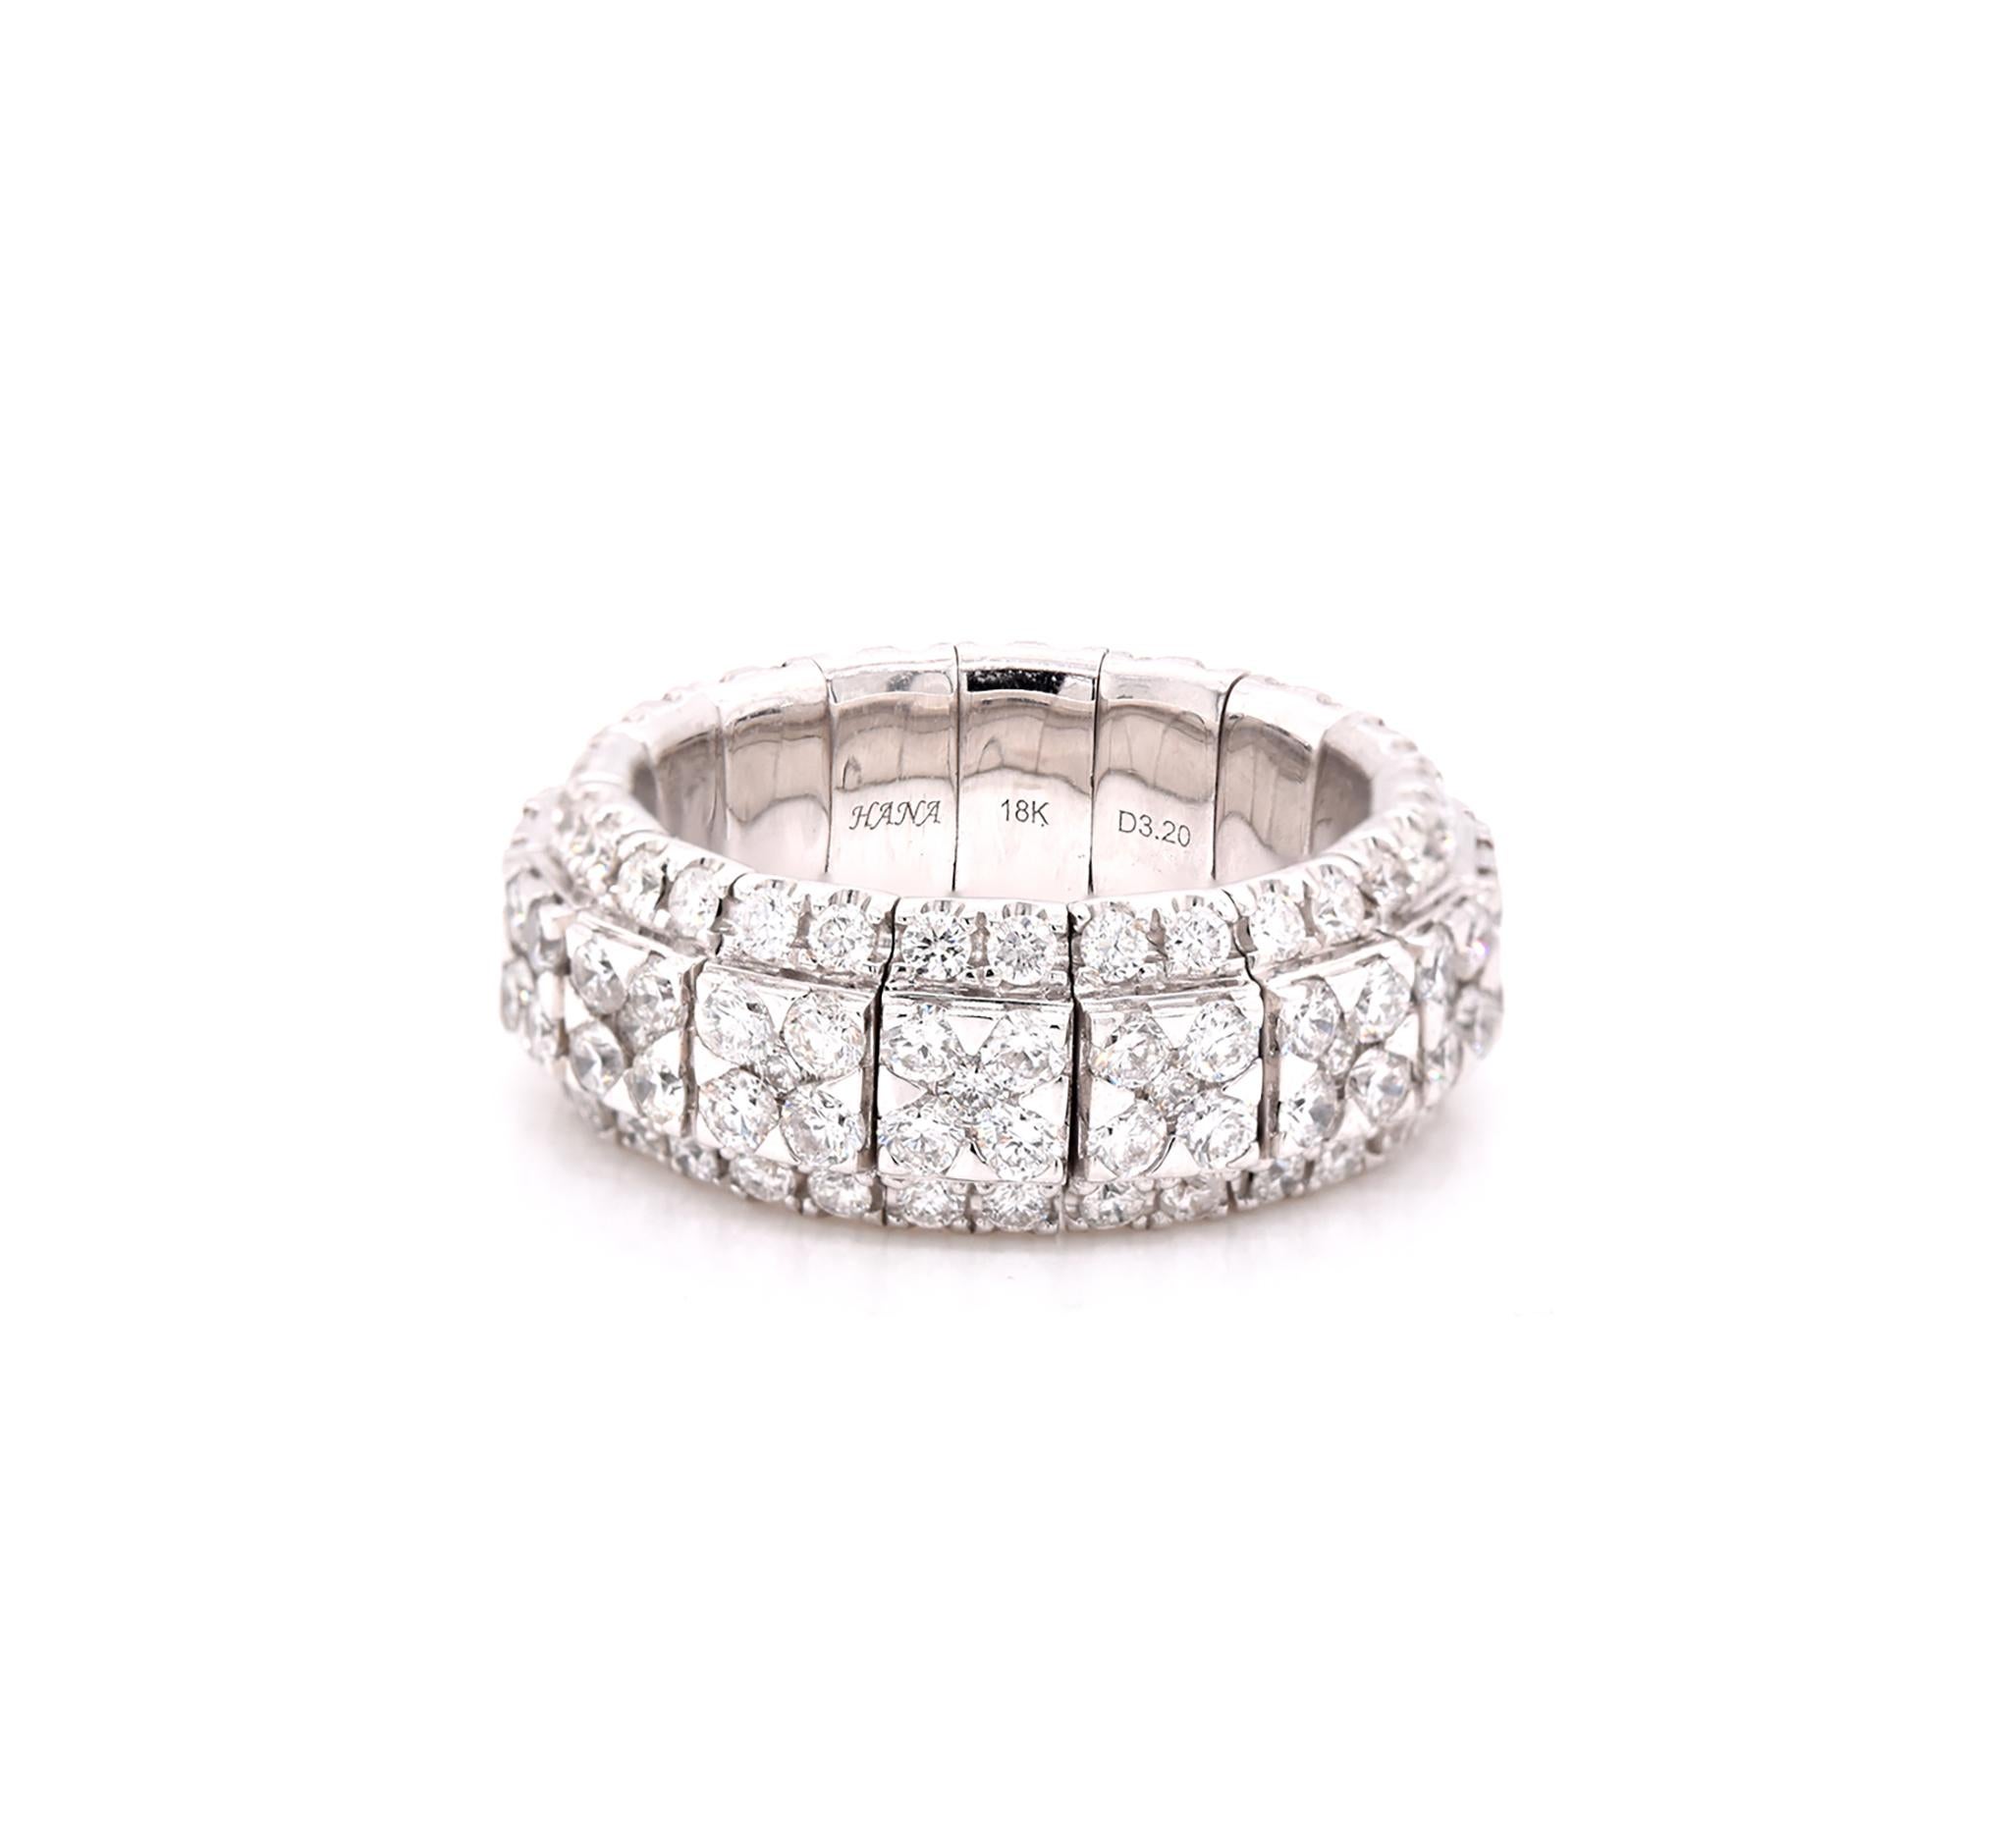 Material: 18K white gold
Diamonds: 144 round cut = 3.20cttw
Color: G
Clarity: VS
Ring Size: 6 .5(Please allow up to two additional business days for sizing requests)
Dimensions: ring top measures 8mm in width 
Weight: 9.65 grams